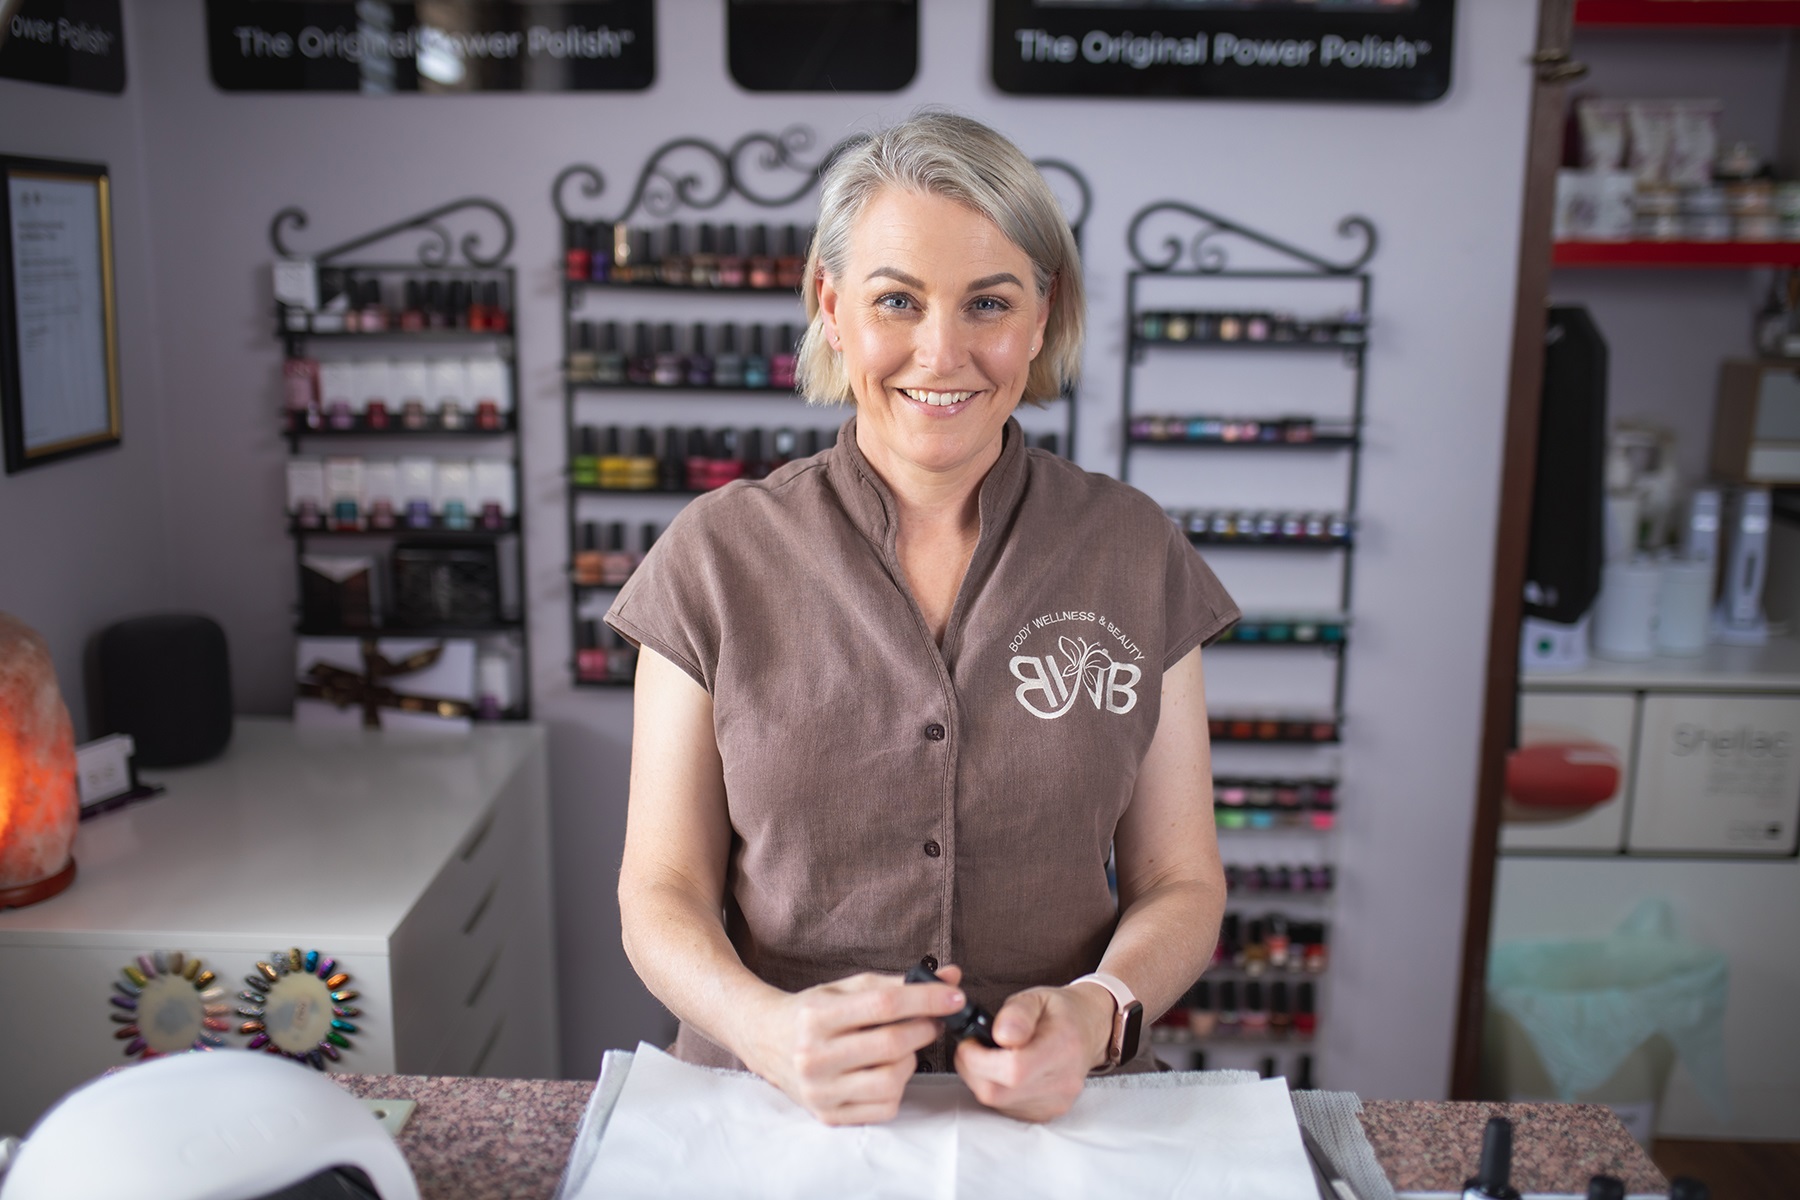 Photo of a woman in a health and beauty business. She is sitting at a table and holding a bottle of nail polish.